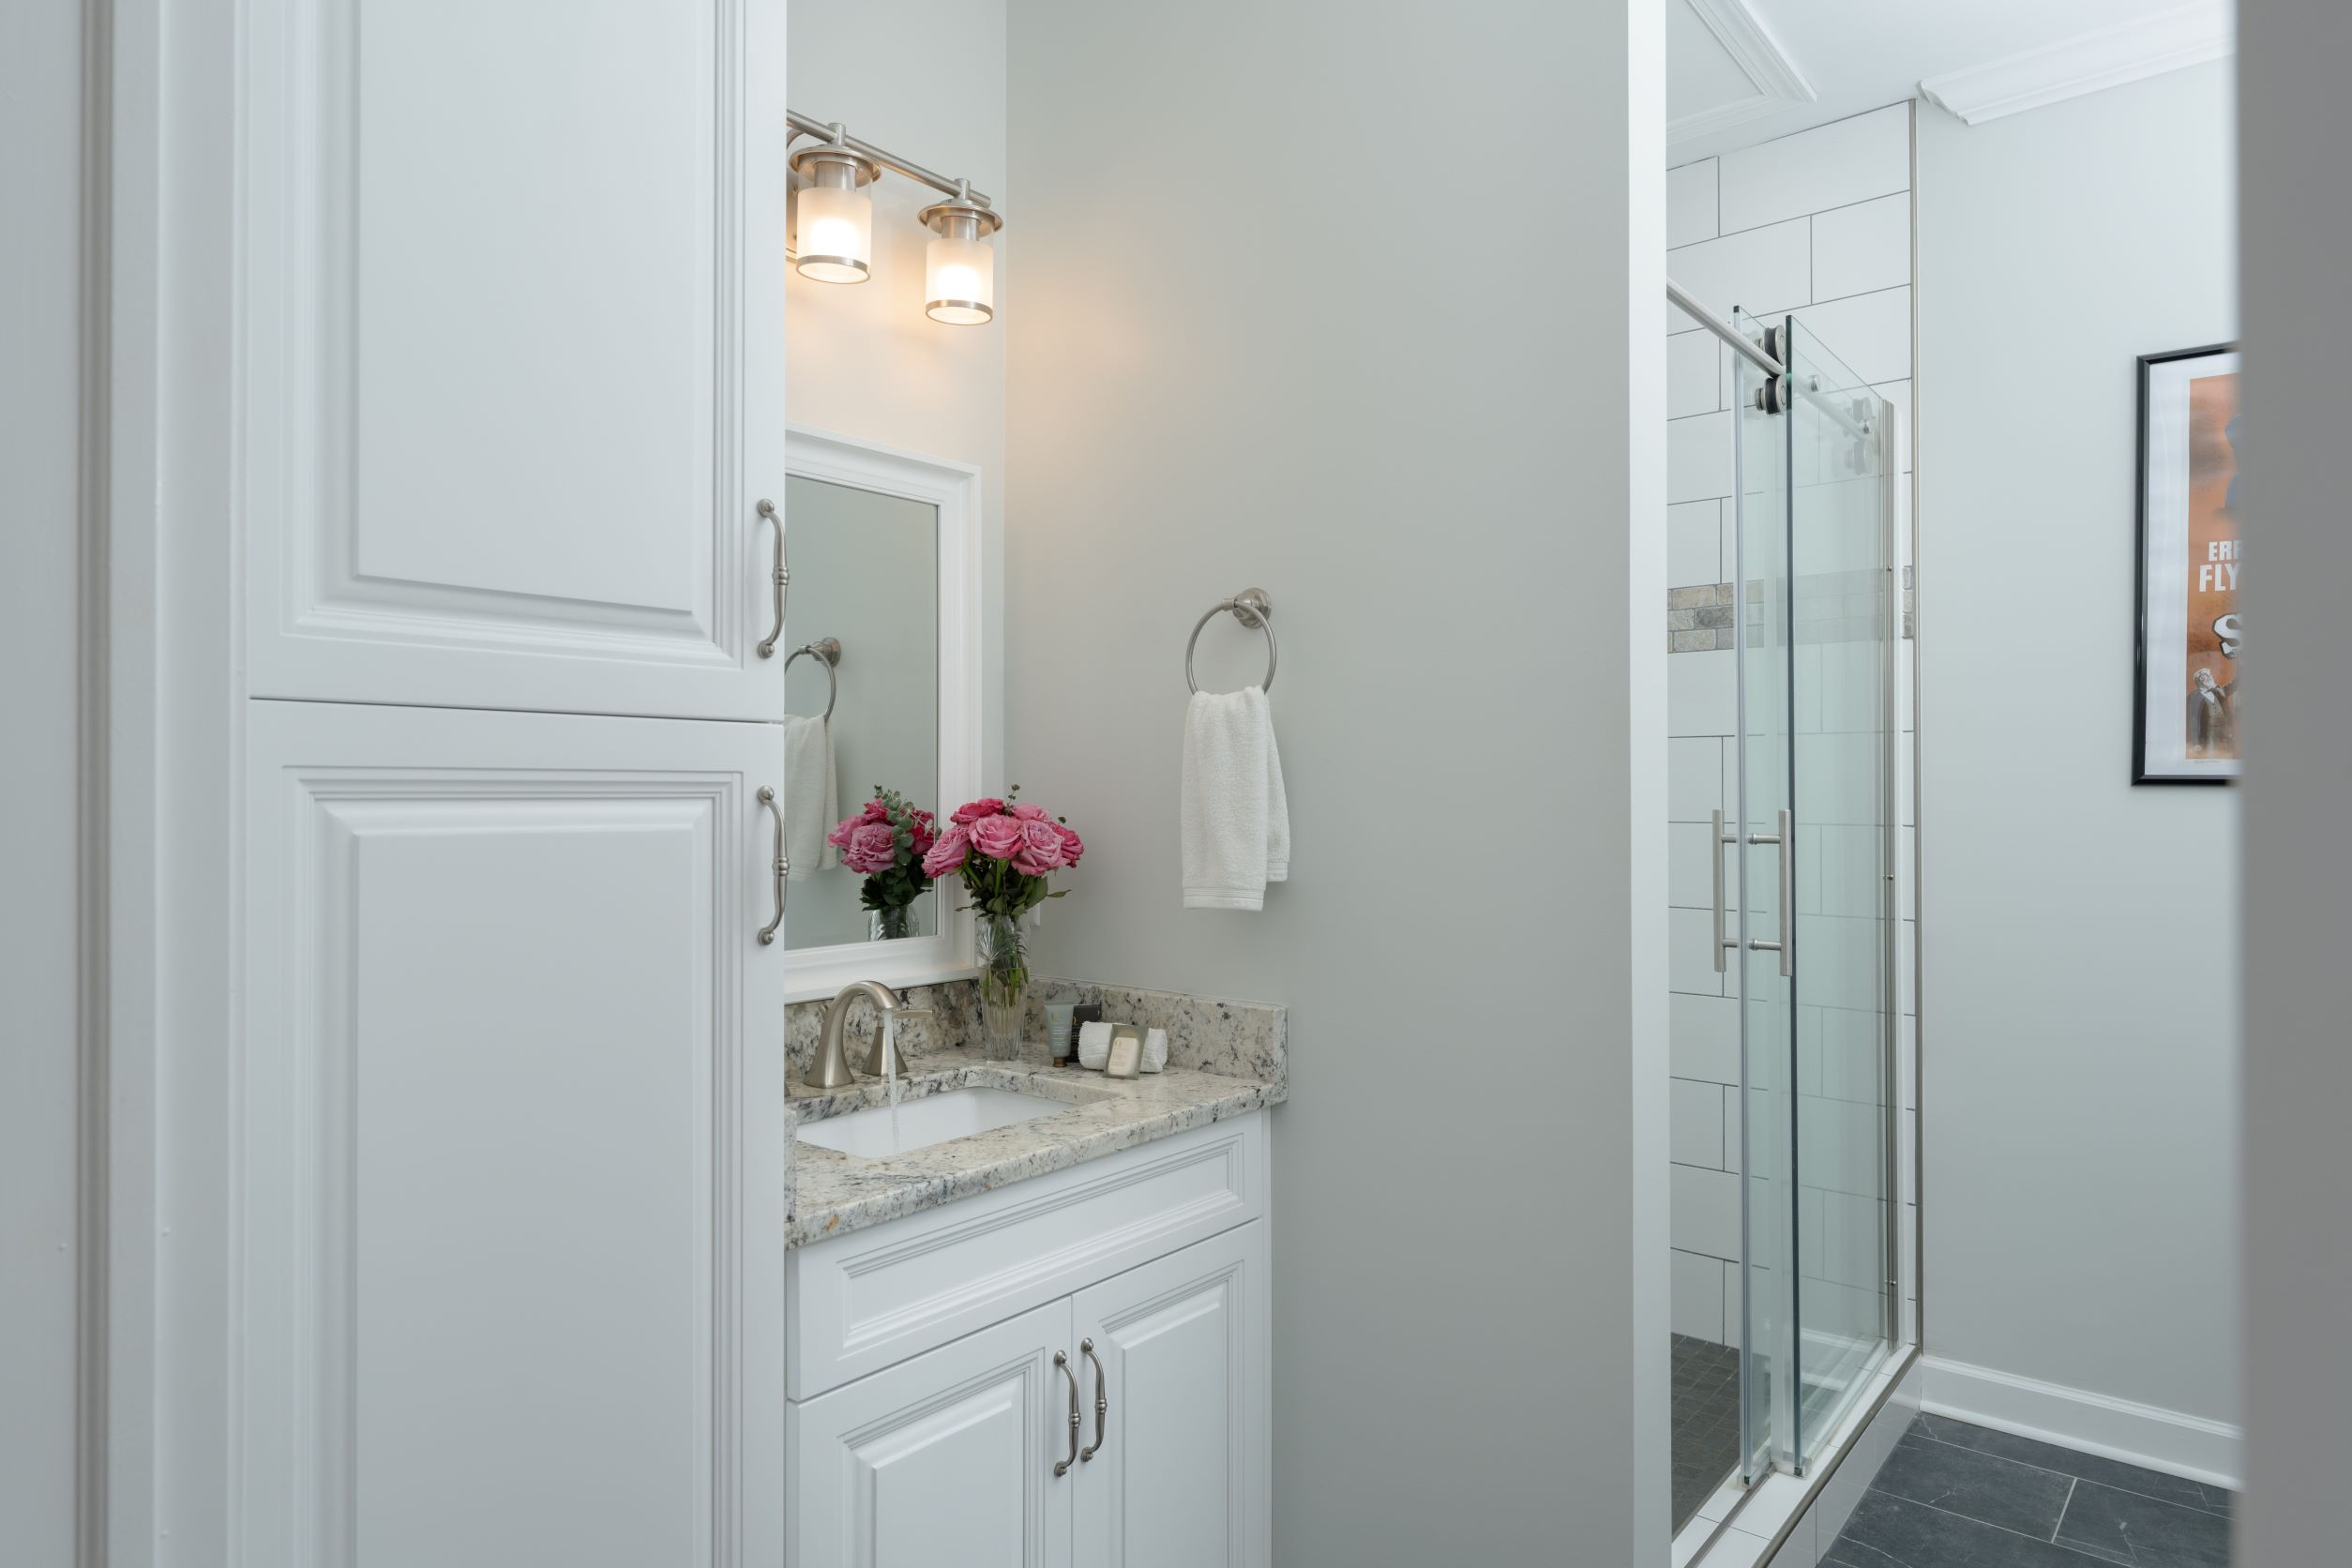 Reagan Bathroomw with granite countertop sink, white storage cabinet and glass door on shower